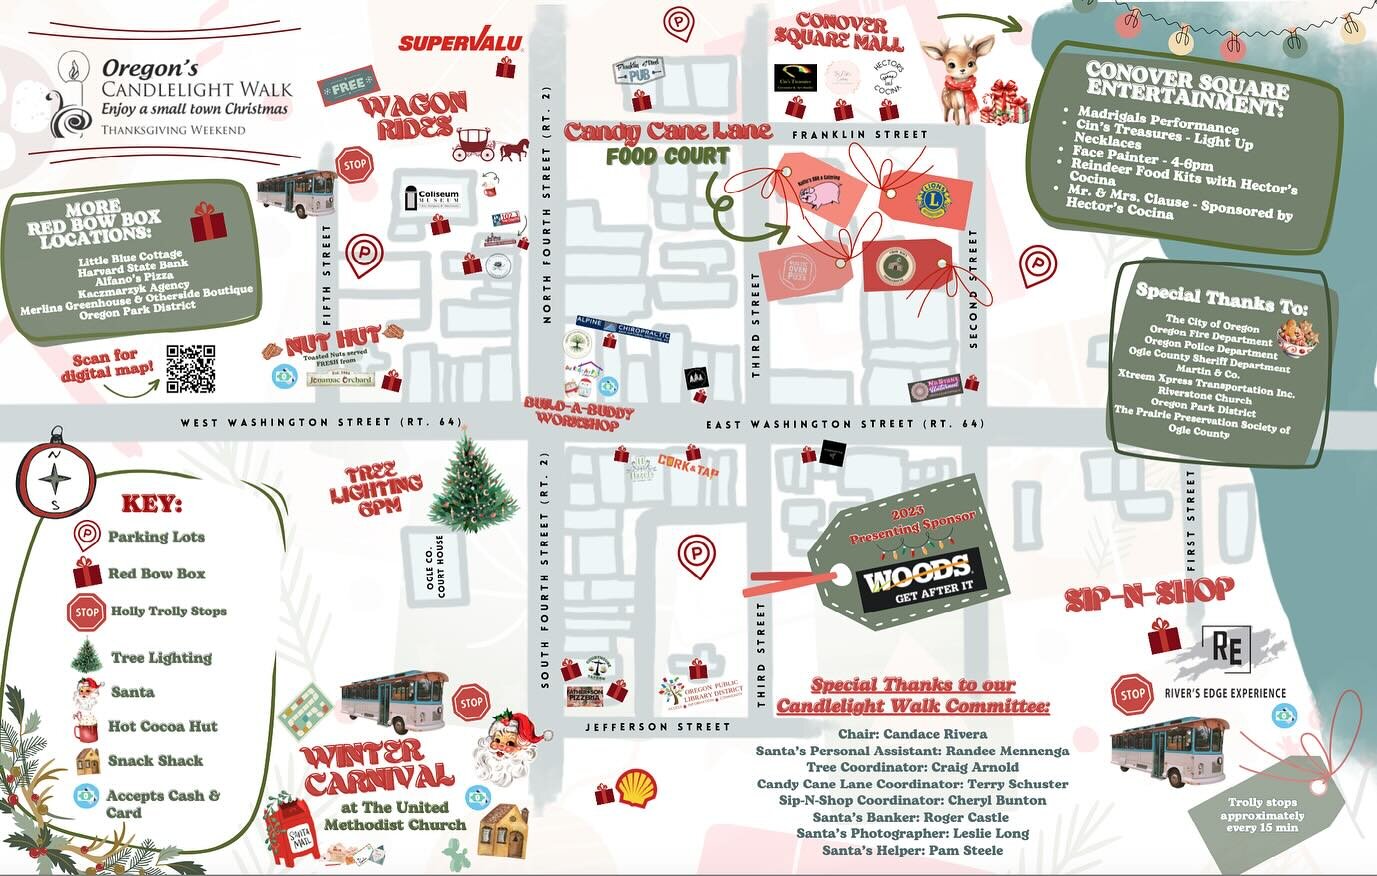 Your map to fun this Saturday! 

Come enjoy an old fashioned holiday Christmas in Oregon from 3-8pm! 🎄🎅🏼

#candlelightwalk #smalltownchristmas #christmas #illinois #christmasmagic #christmascountdown #oldfashioned #holidayfun #holidays #holidaysea